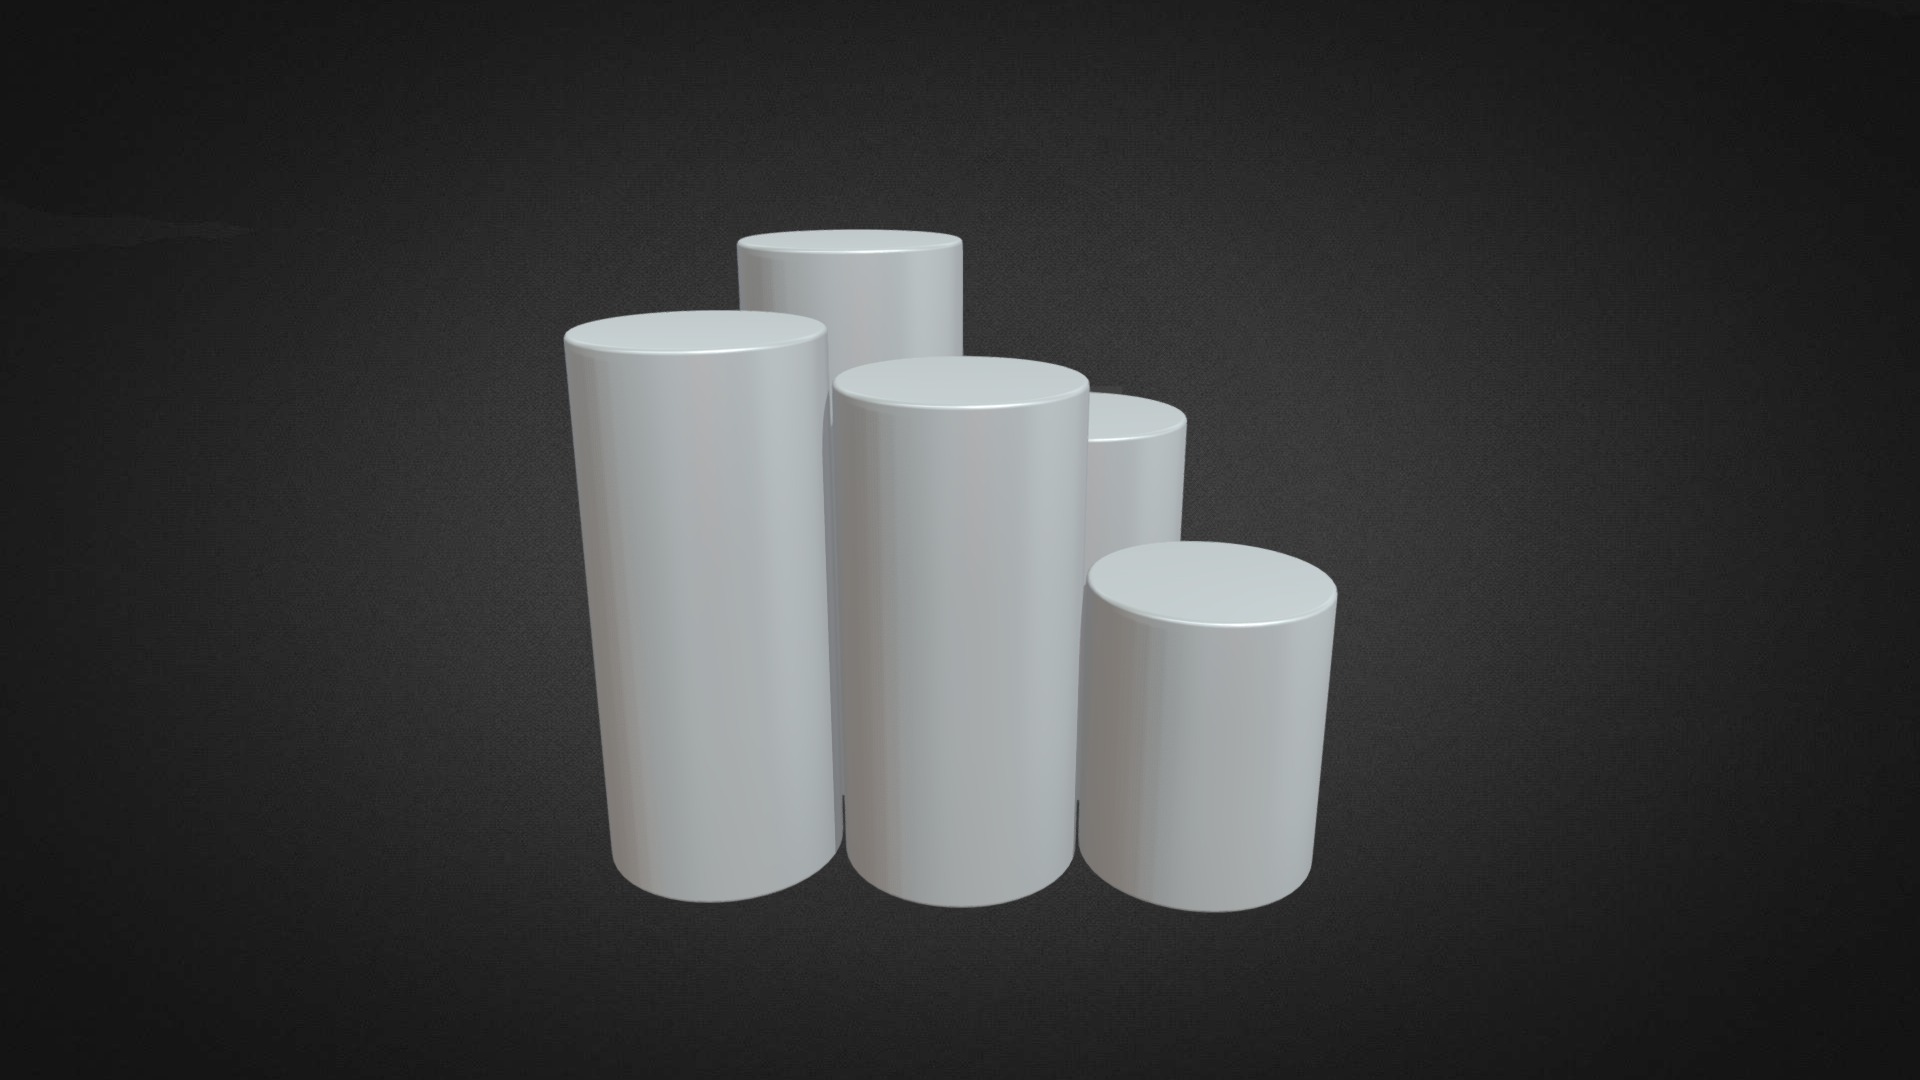 3D model Cylinder Plinths Hire - This is a 3D model of the Cylinder Plinths Hire. The 3D model is about a group of white cups.